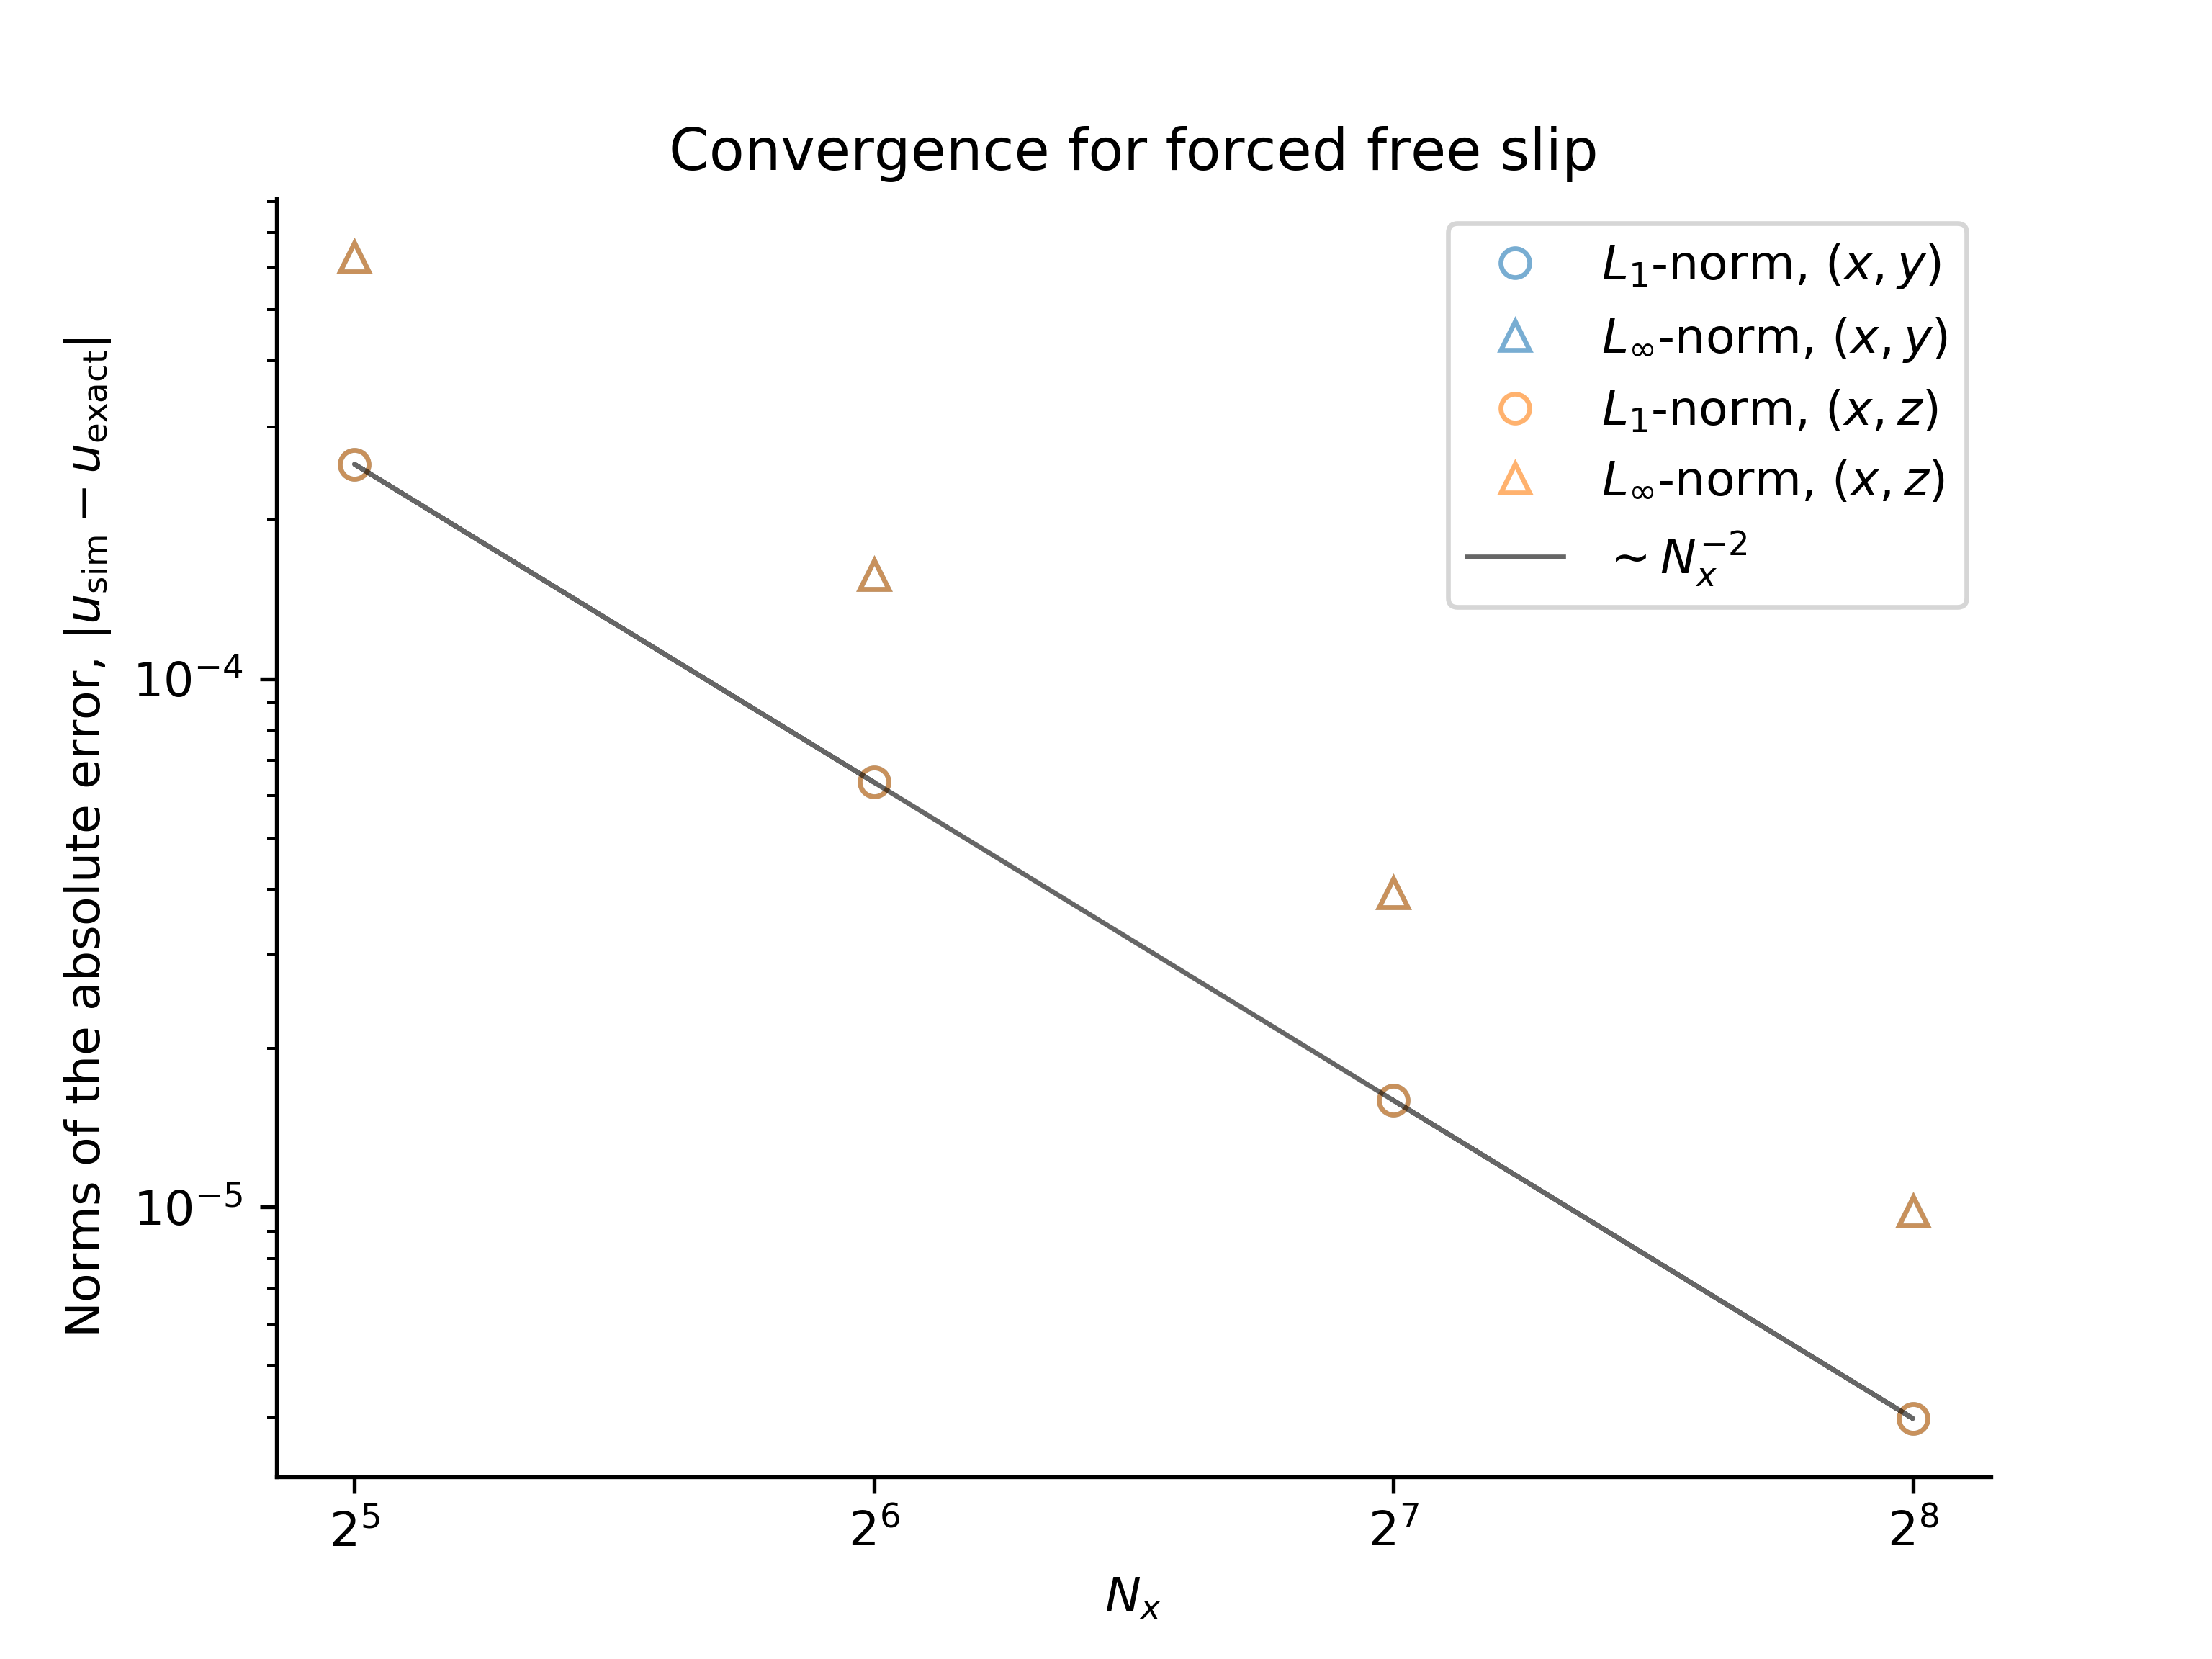 Forced free slip convergence